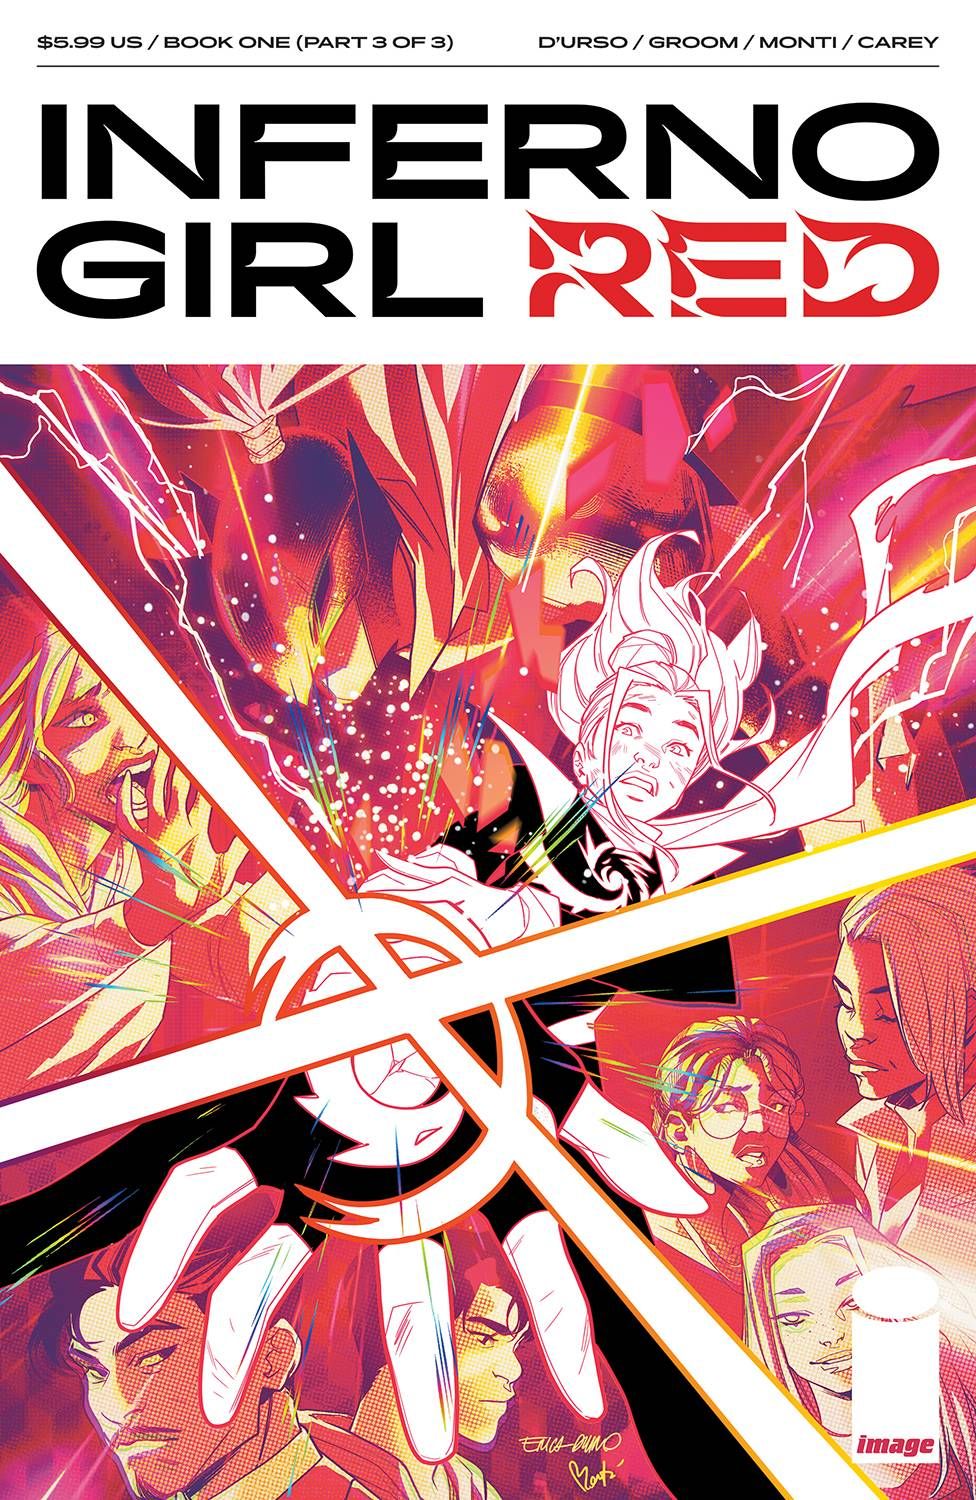 Inferno Girl Red - Book One #3 Comic